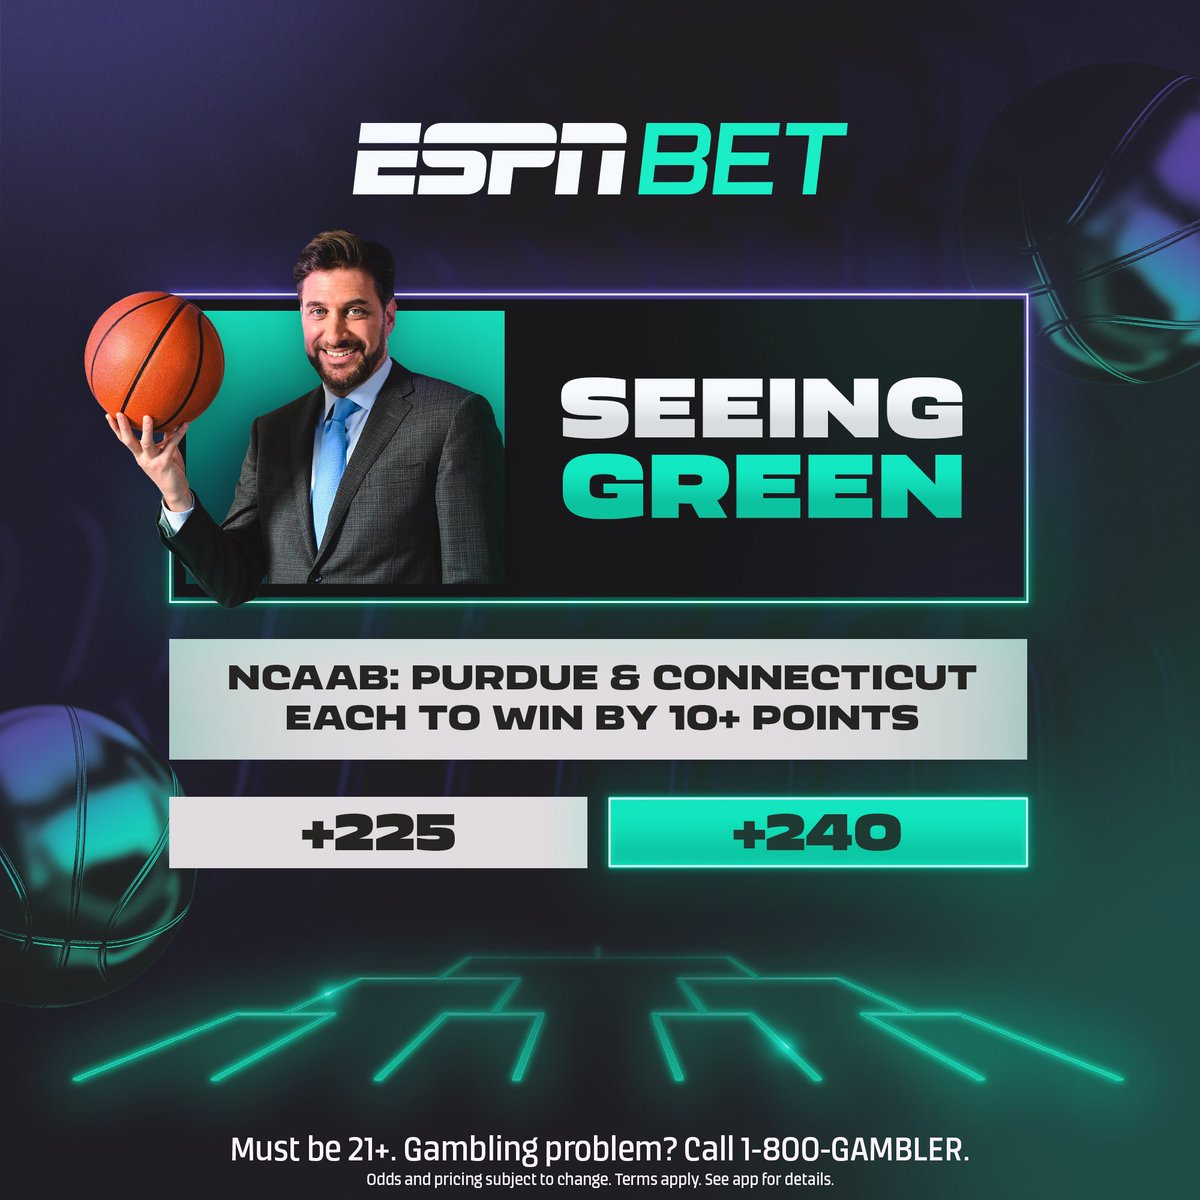 With these Four it’s all about the Favorites! I’m taking Purdue & UCONN to each win by 10 or more points. Are you Seeing Green? 👀👀espnbet.app.link/M8XUkETHHEb #ad